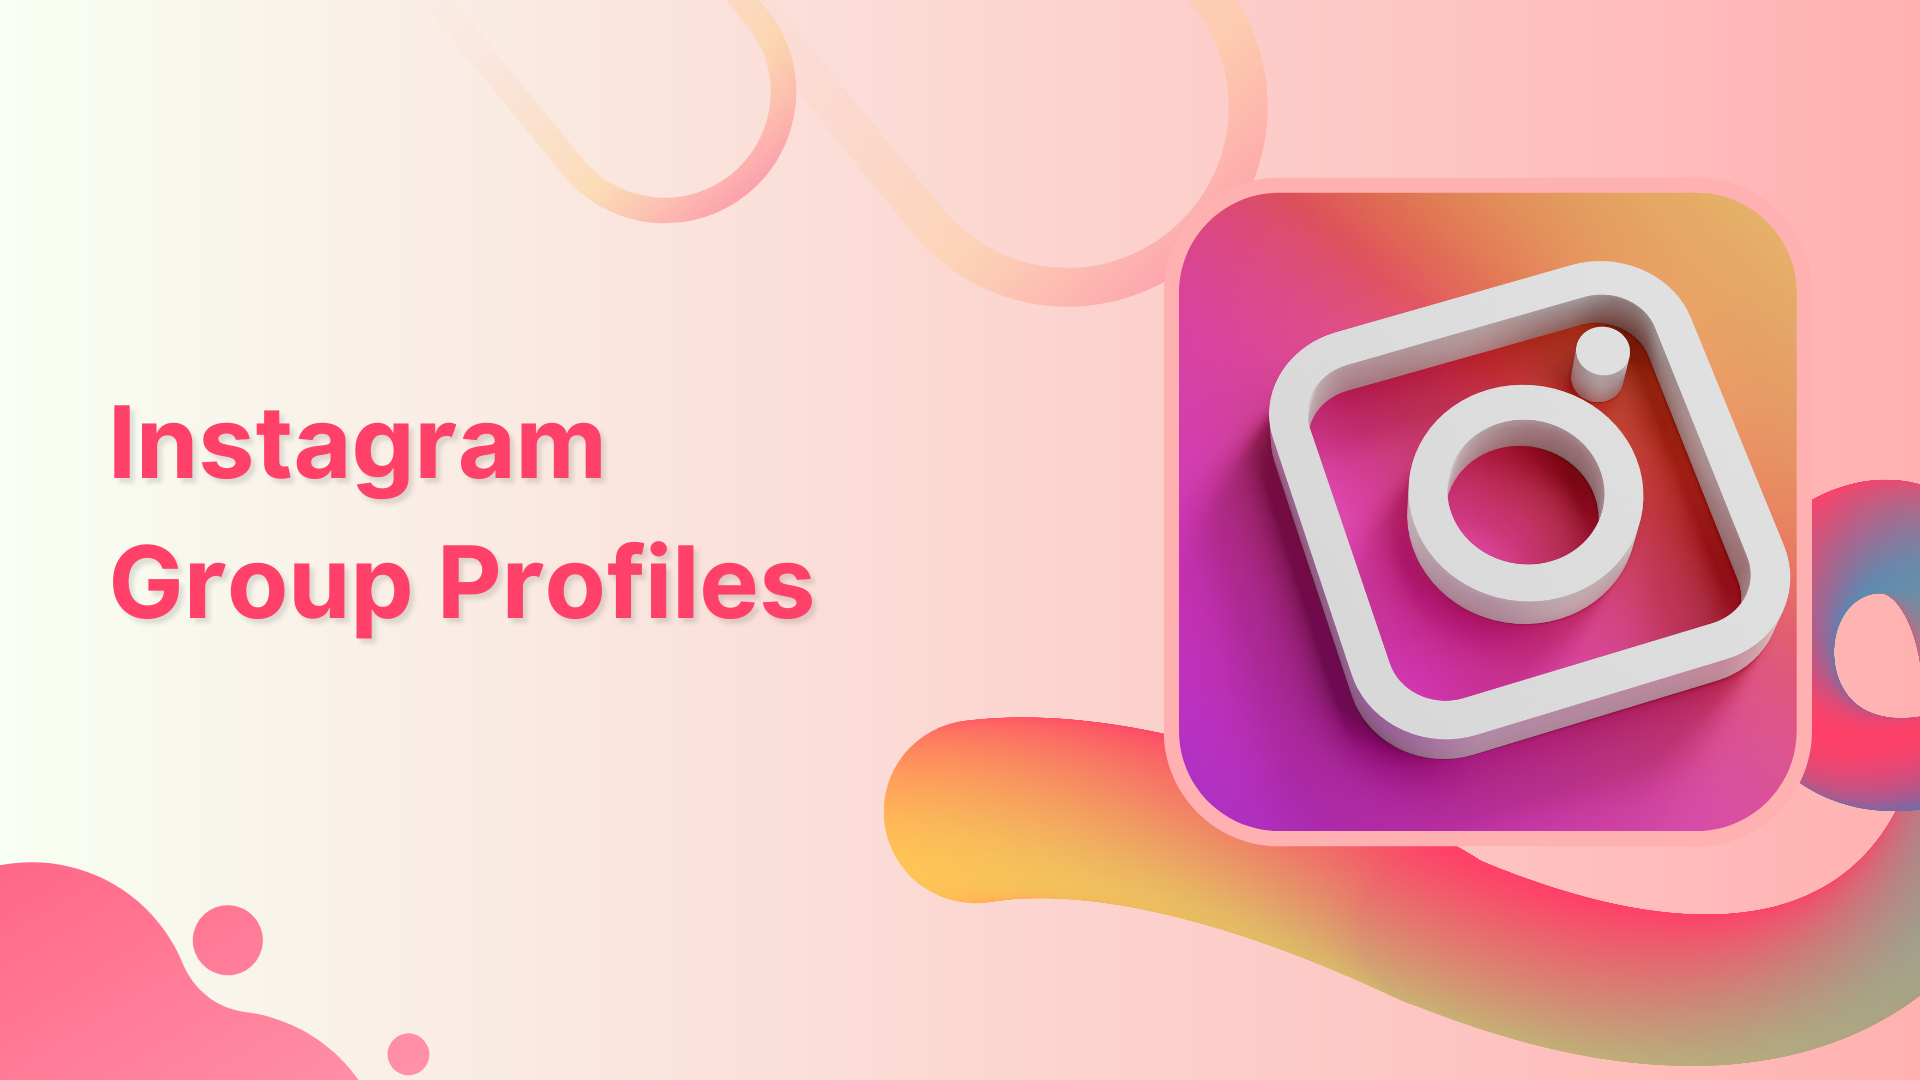 Everything You Need to Know About Instagram Group Profiles